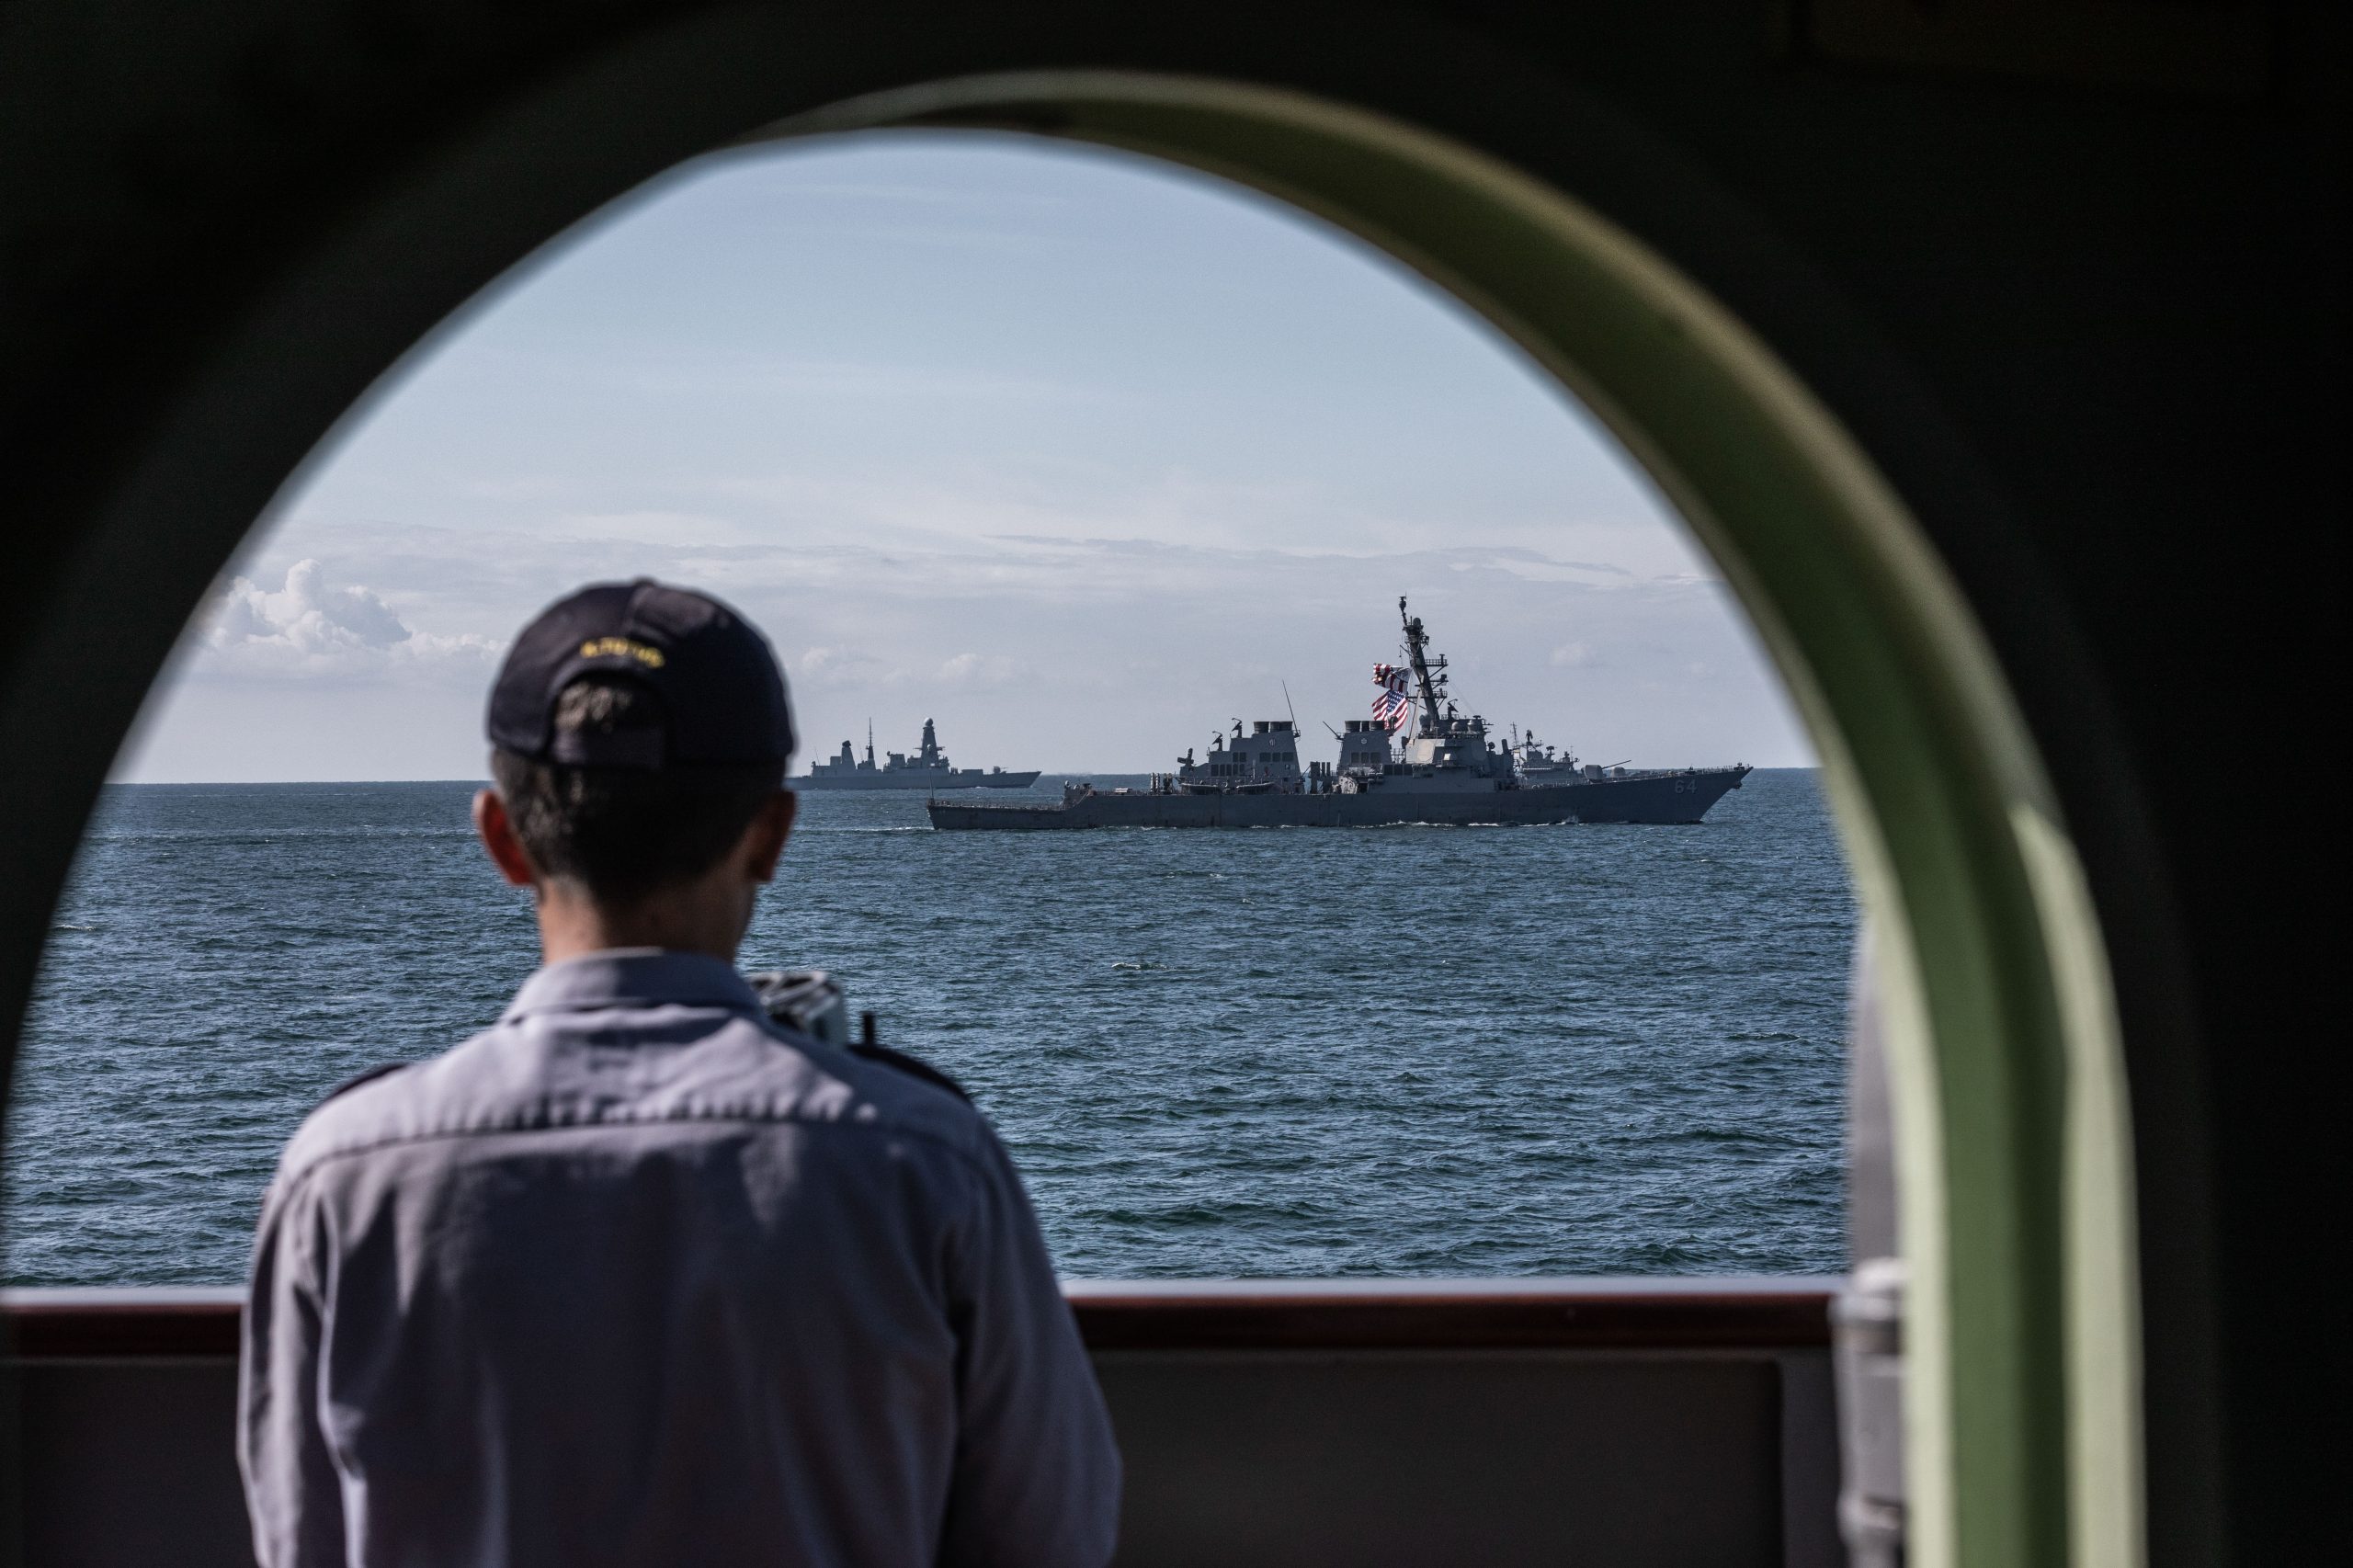 Photo: A Turkish sailor watches a formation of warships from the frigate TCG Turgutreis during Exercise Sea Breeze 2019. Credit: NATO via Flickr. https://flic.kr/p/2gH7pYB